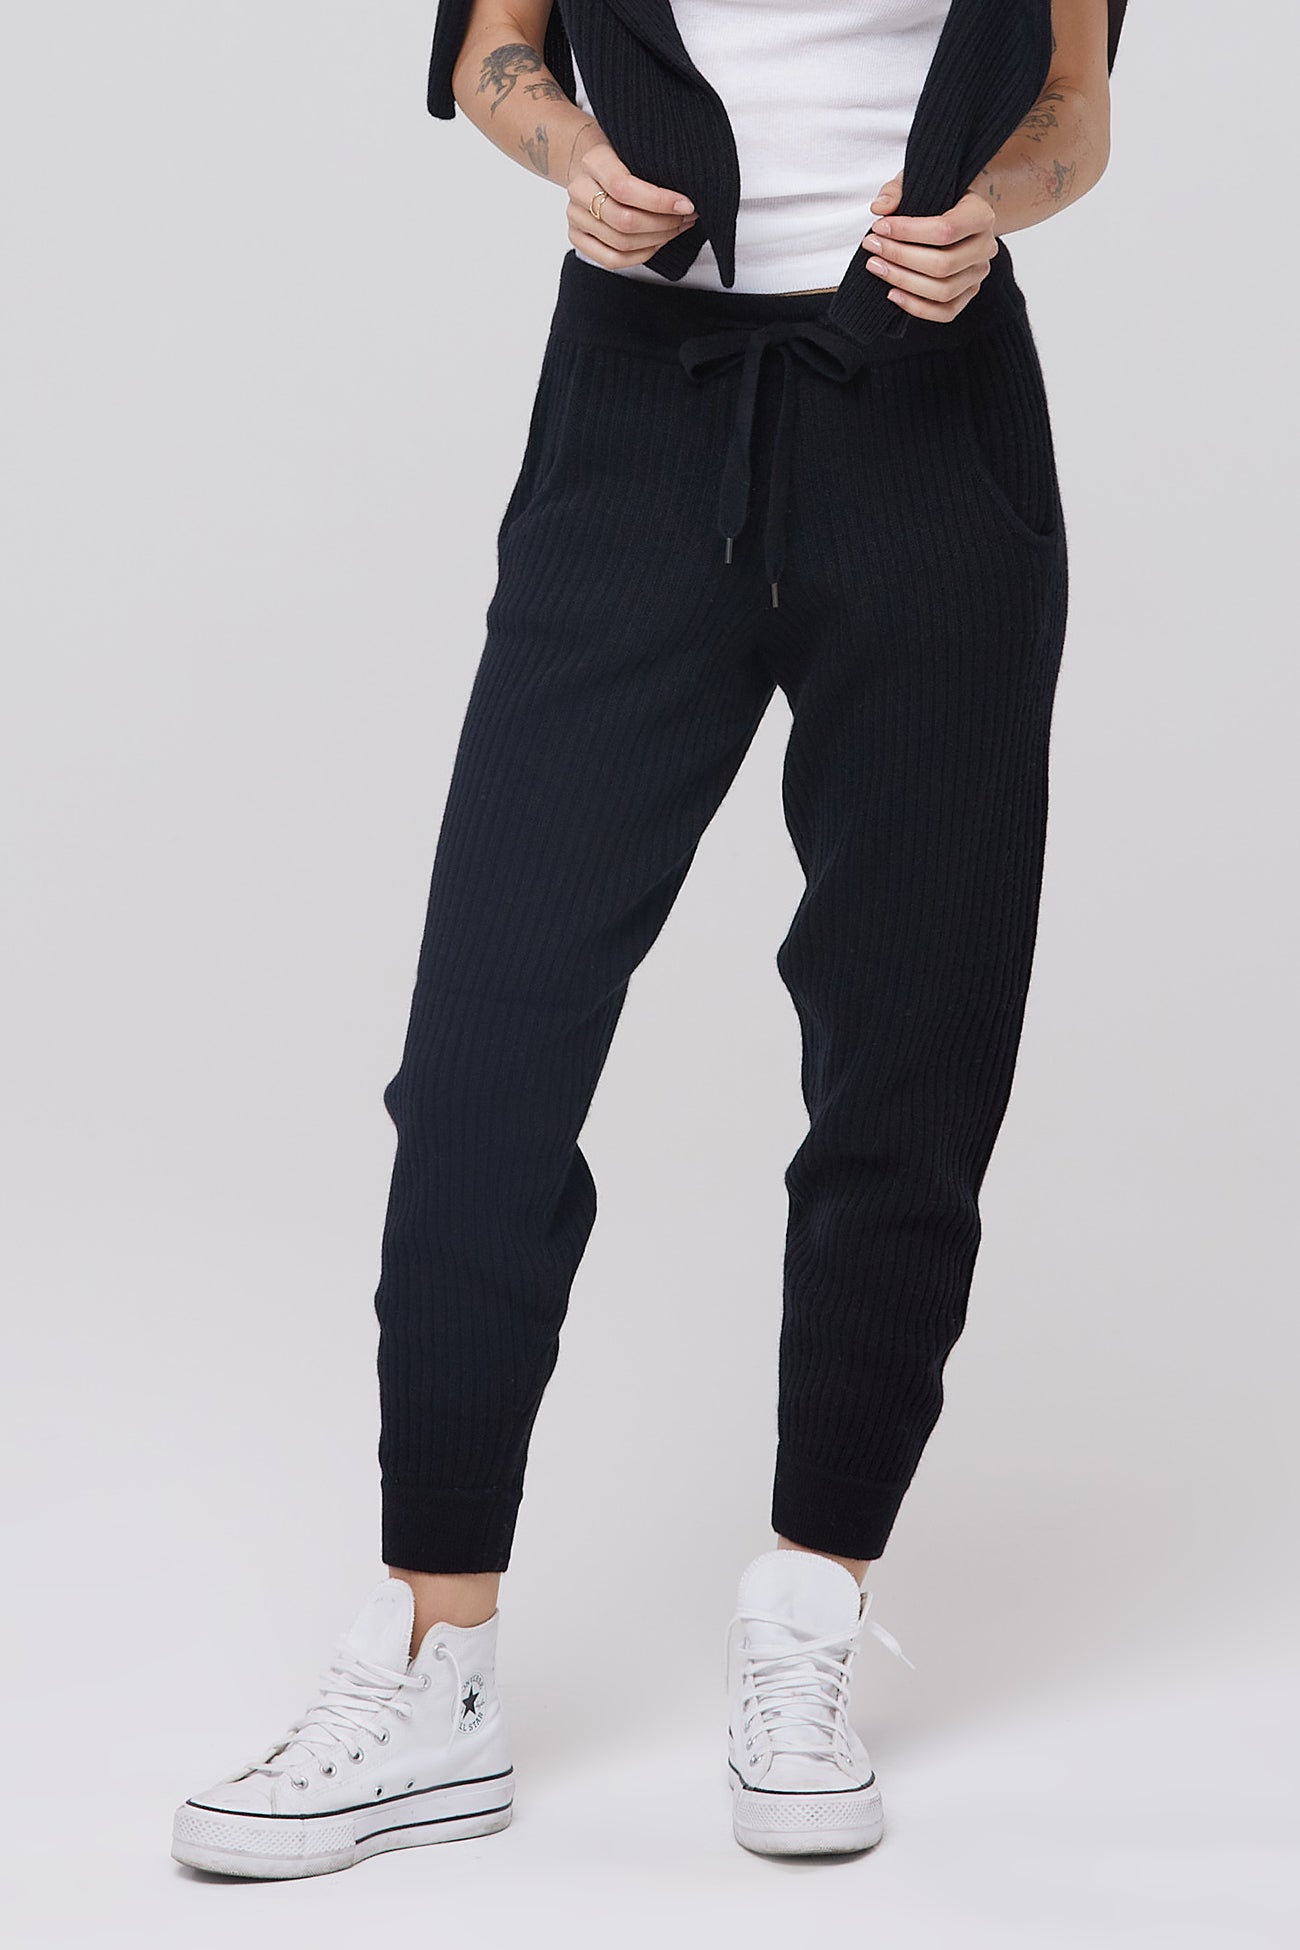 Cashmere Thin Ribbed Lounge Joggers- Black – Snapdragon Designs